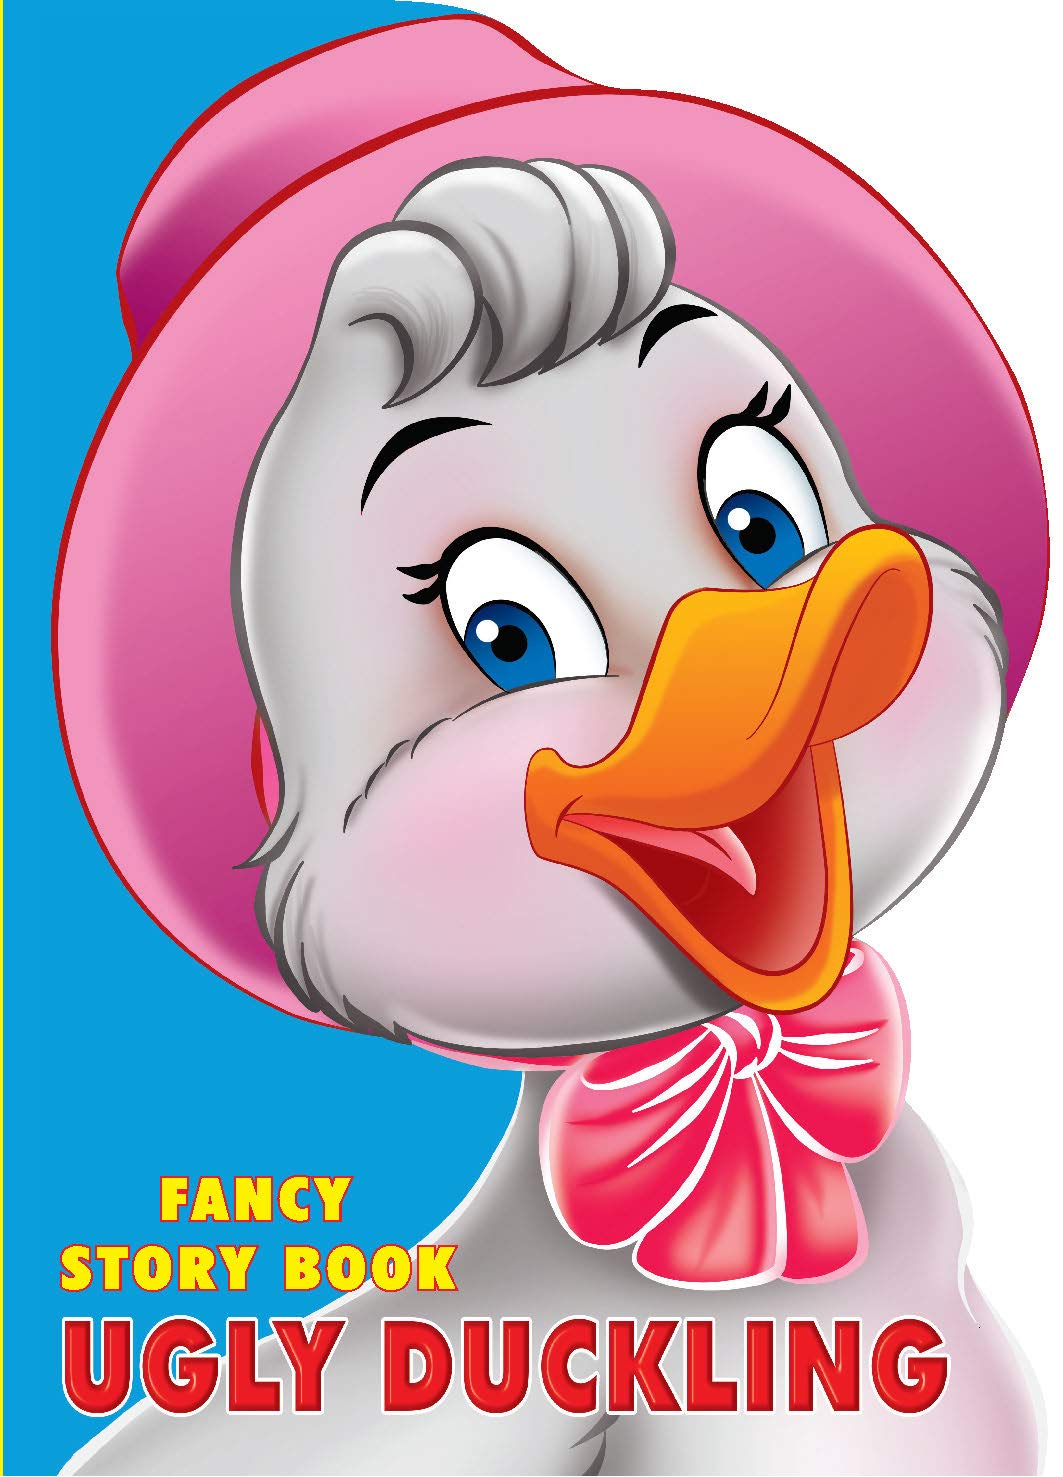 Ugly Duckling (Fancy Story Book)